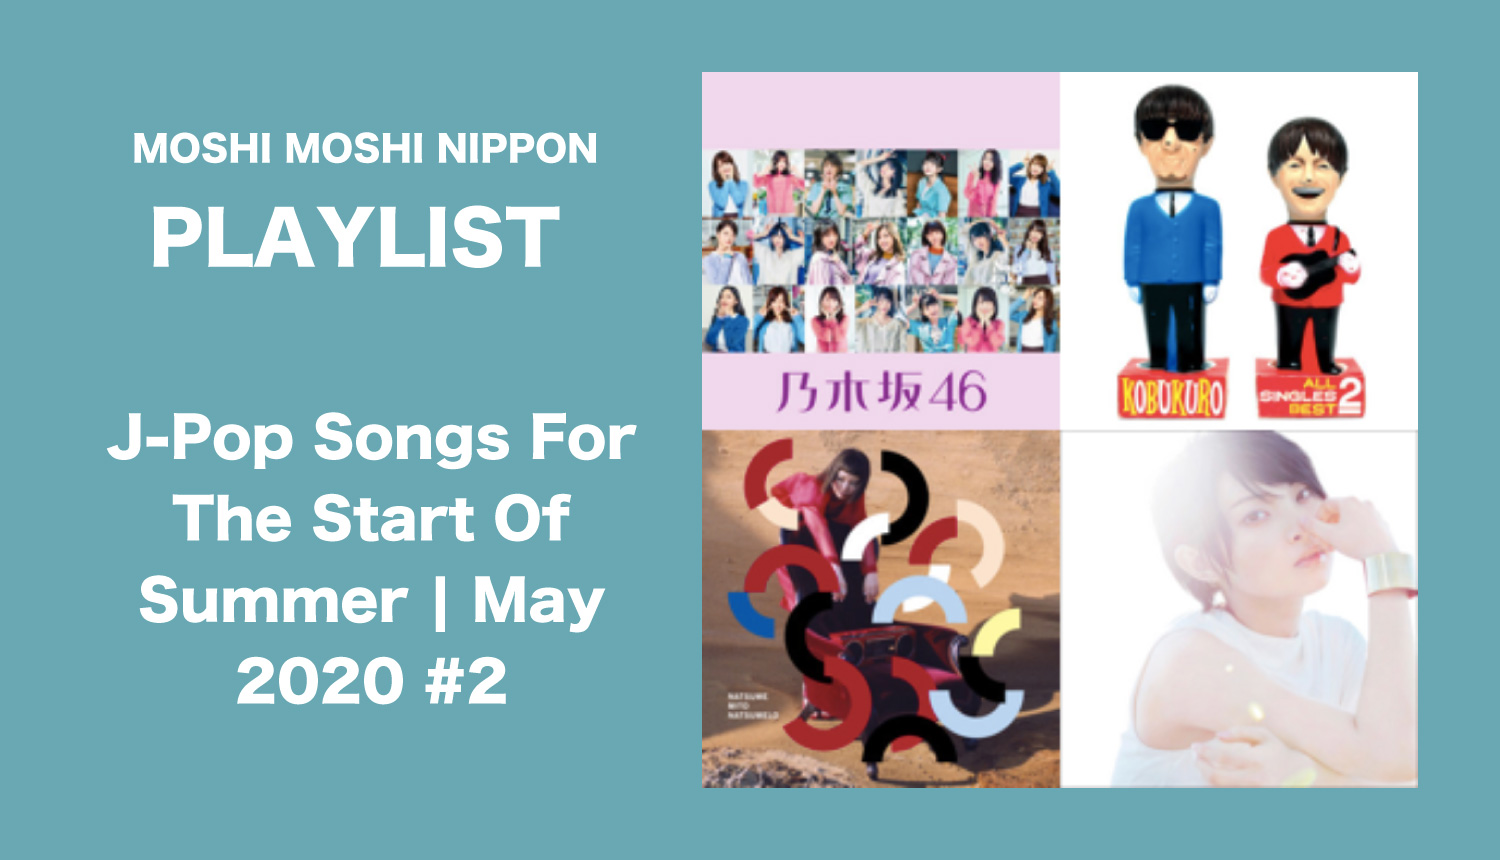 MOSHI MOSHI PLAYLIST: J-Pop Songs For The Start Of Summer